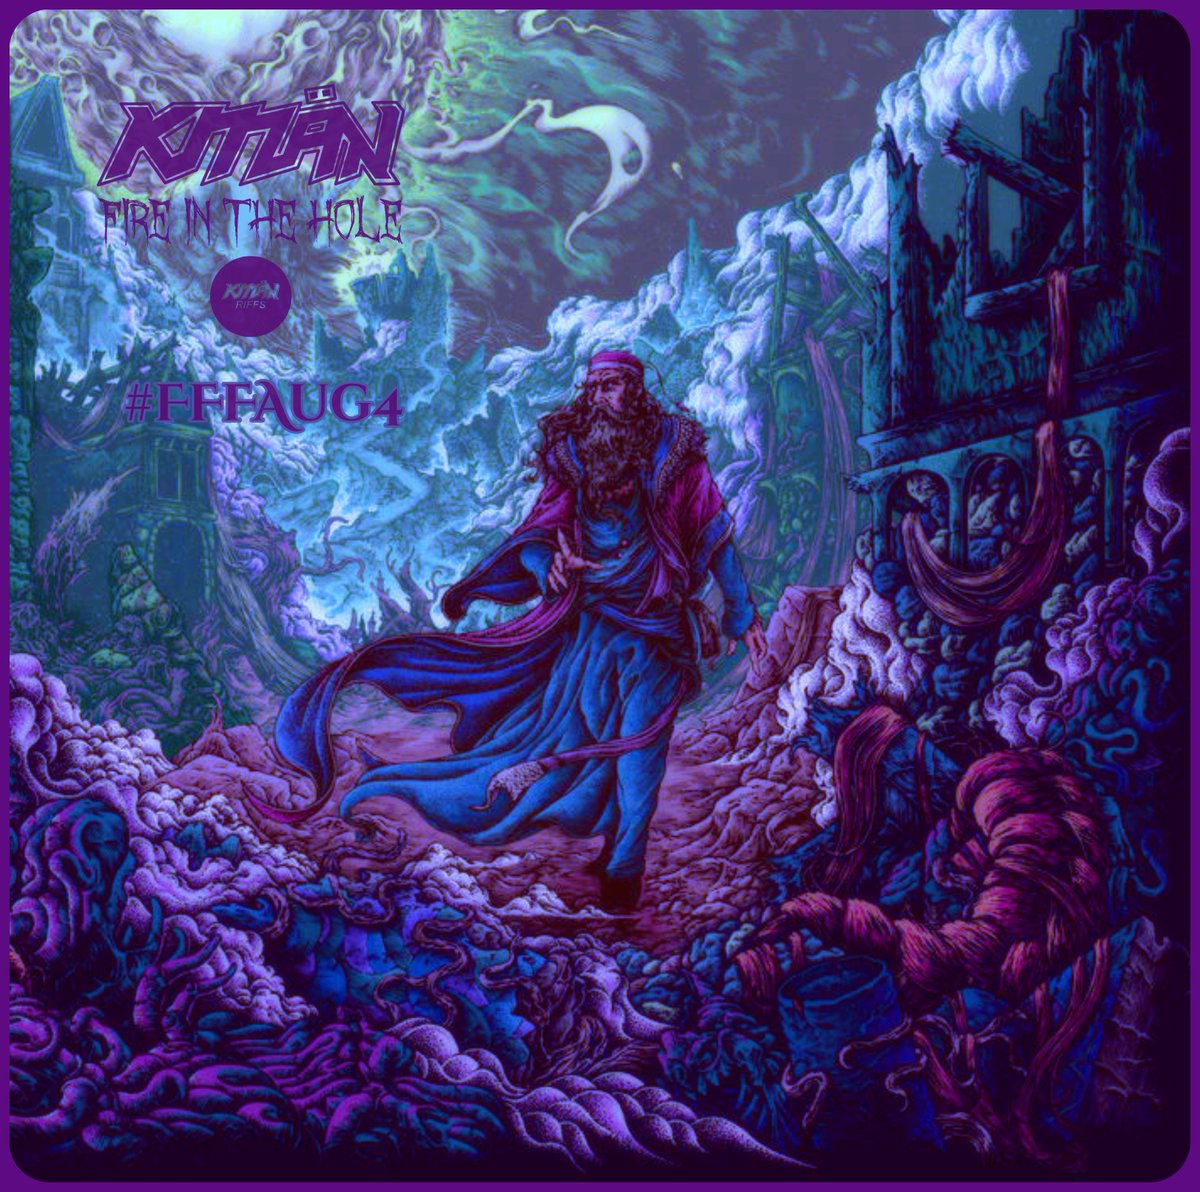 FIRE IN THE HOLE - Album of the Week!💣☣️ ACID MAGUS - Hope is Heavy 🇿🇦 ☣️ Better make room on your Psych Doom Metal lists, because AM are here to stay. Expected something killer and got way more that that! HTTV and Sgt THD vibes. Huge wicked riffs!☣️#FFFAug4 #FITH #AOTW #KMäN